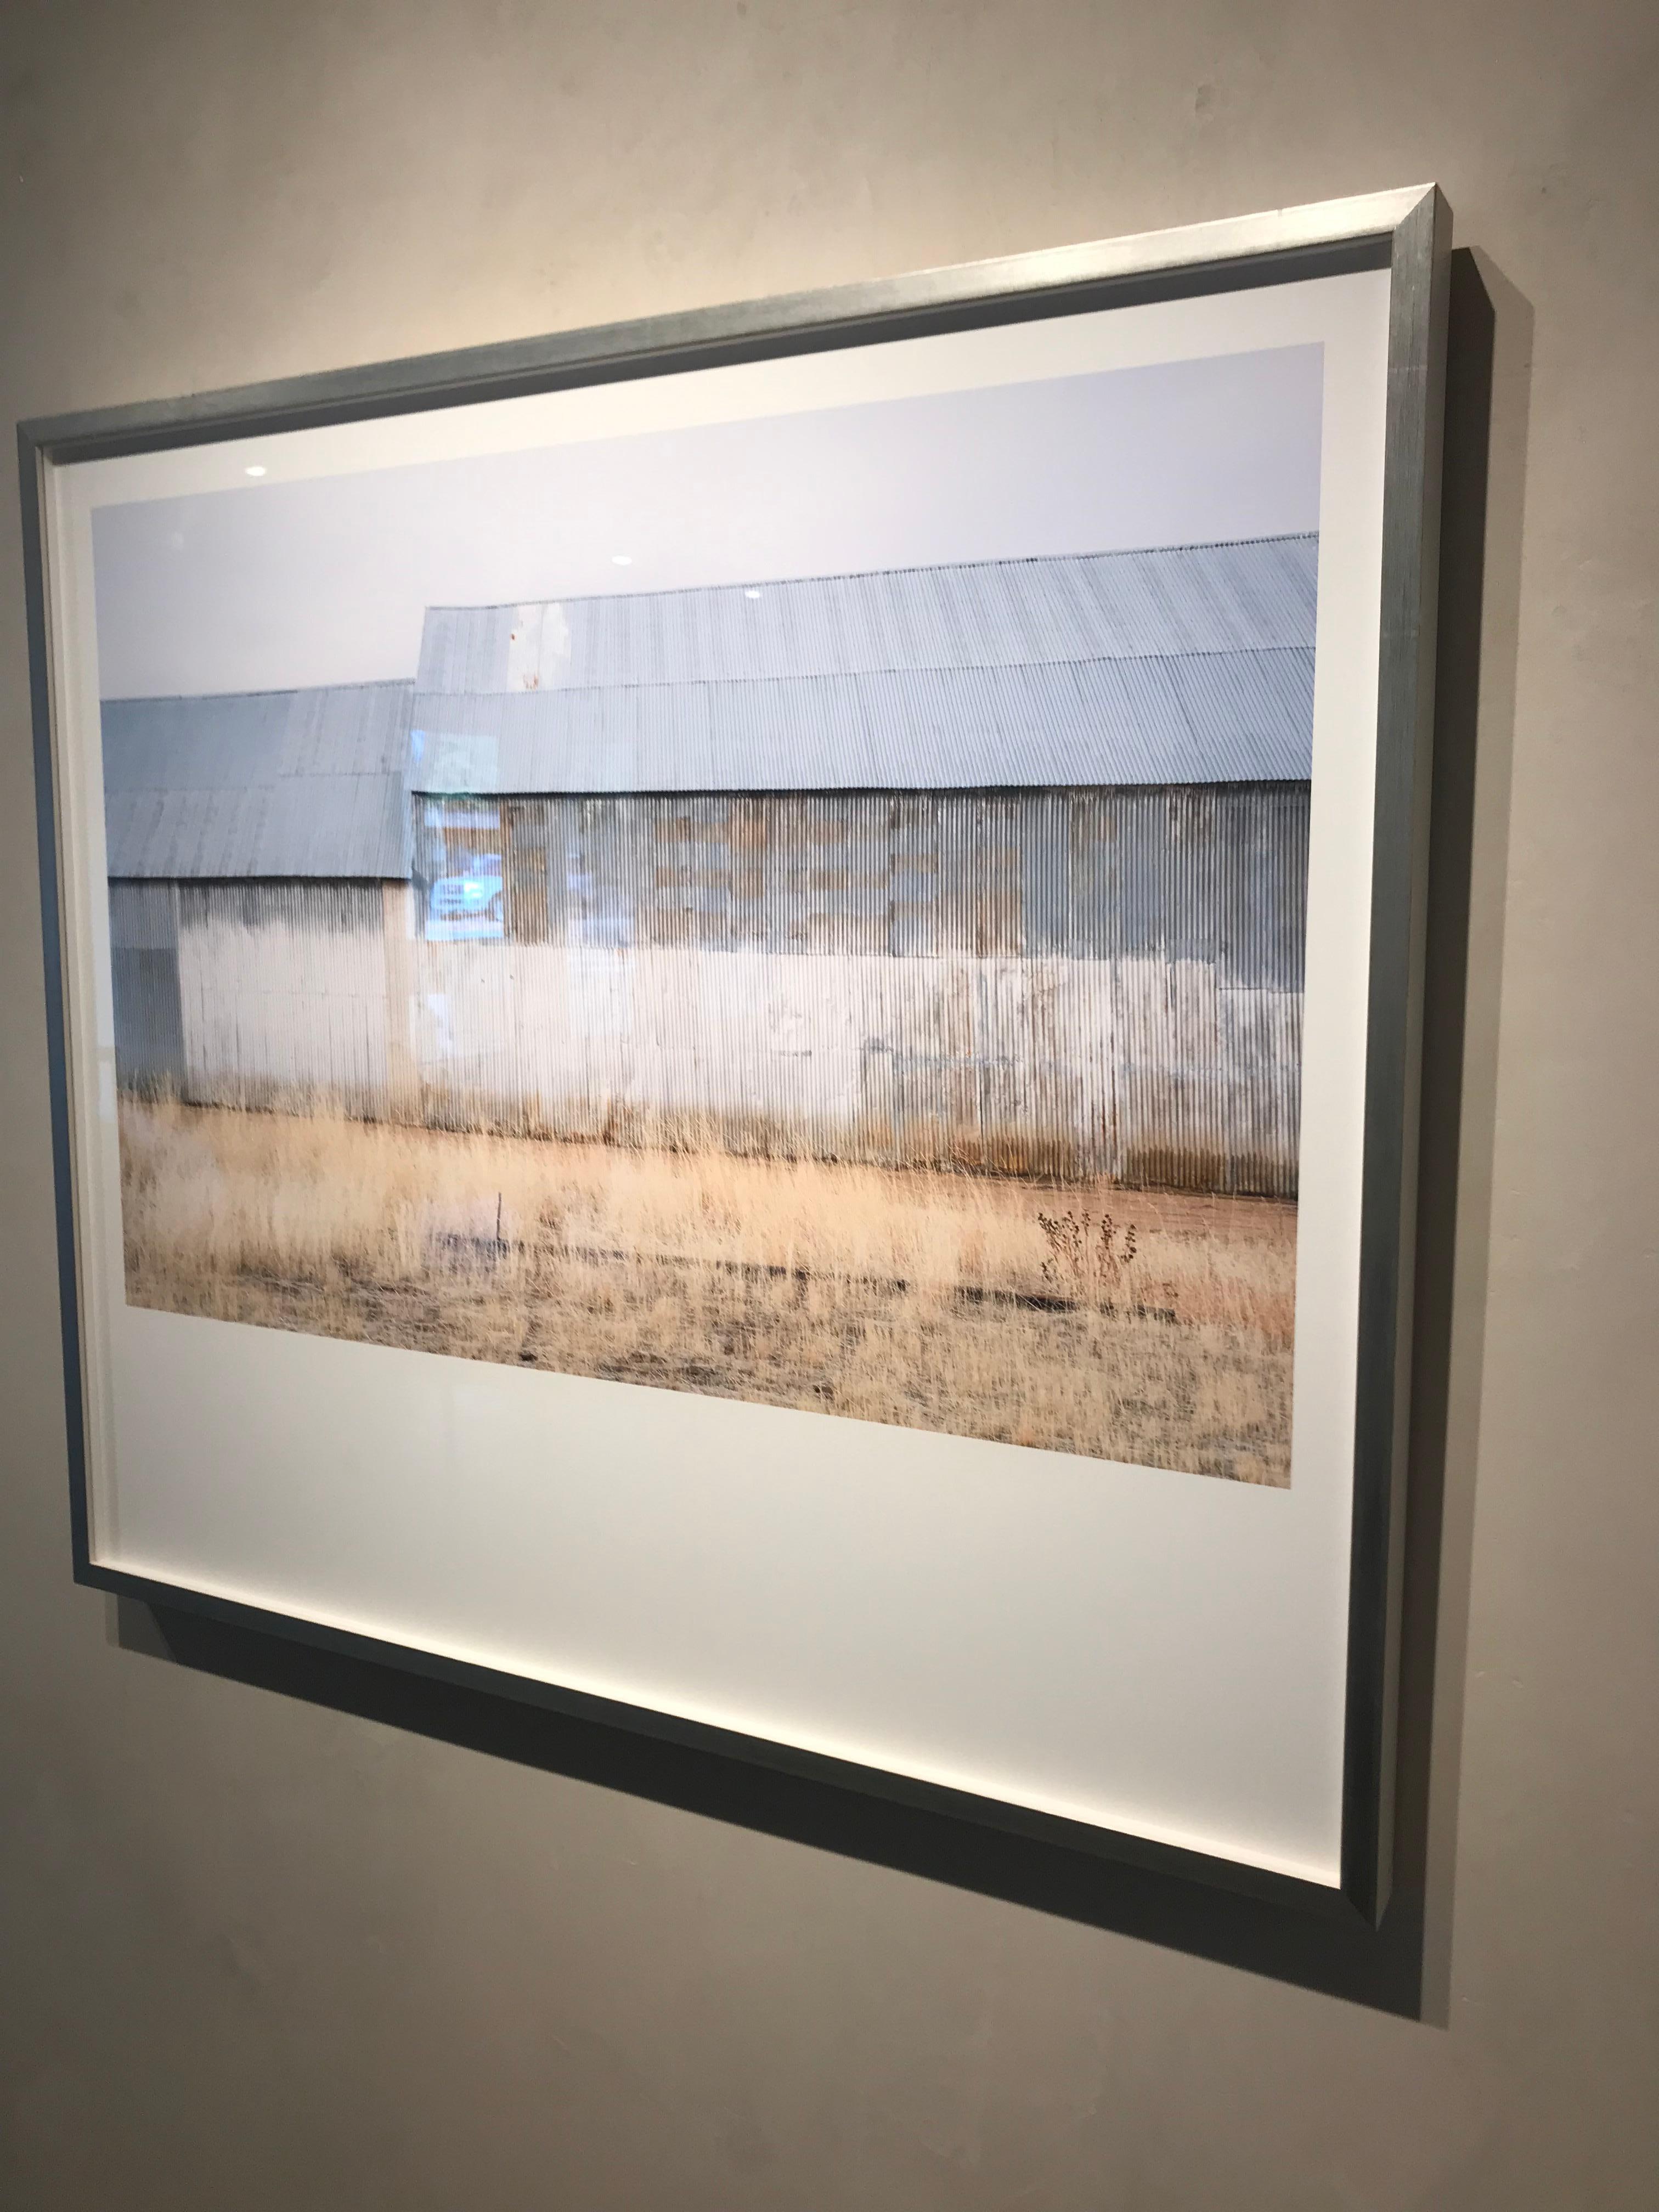 Painted Barn I- color photograph of agricultural building in Idaho framed - Contemporary Photograph by Wendel Wirth